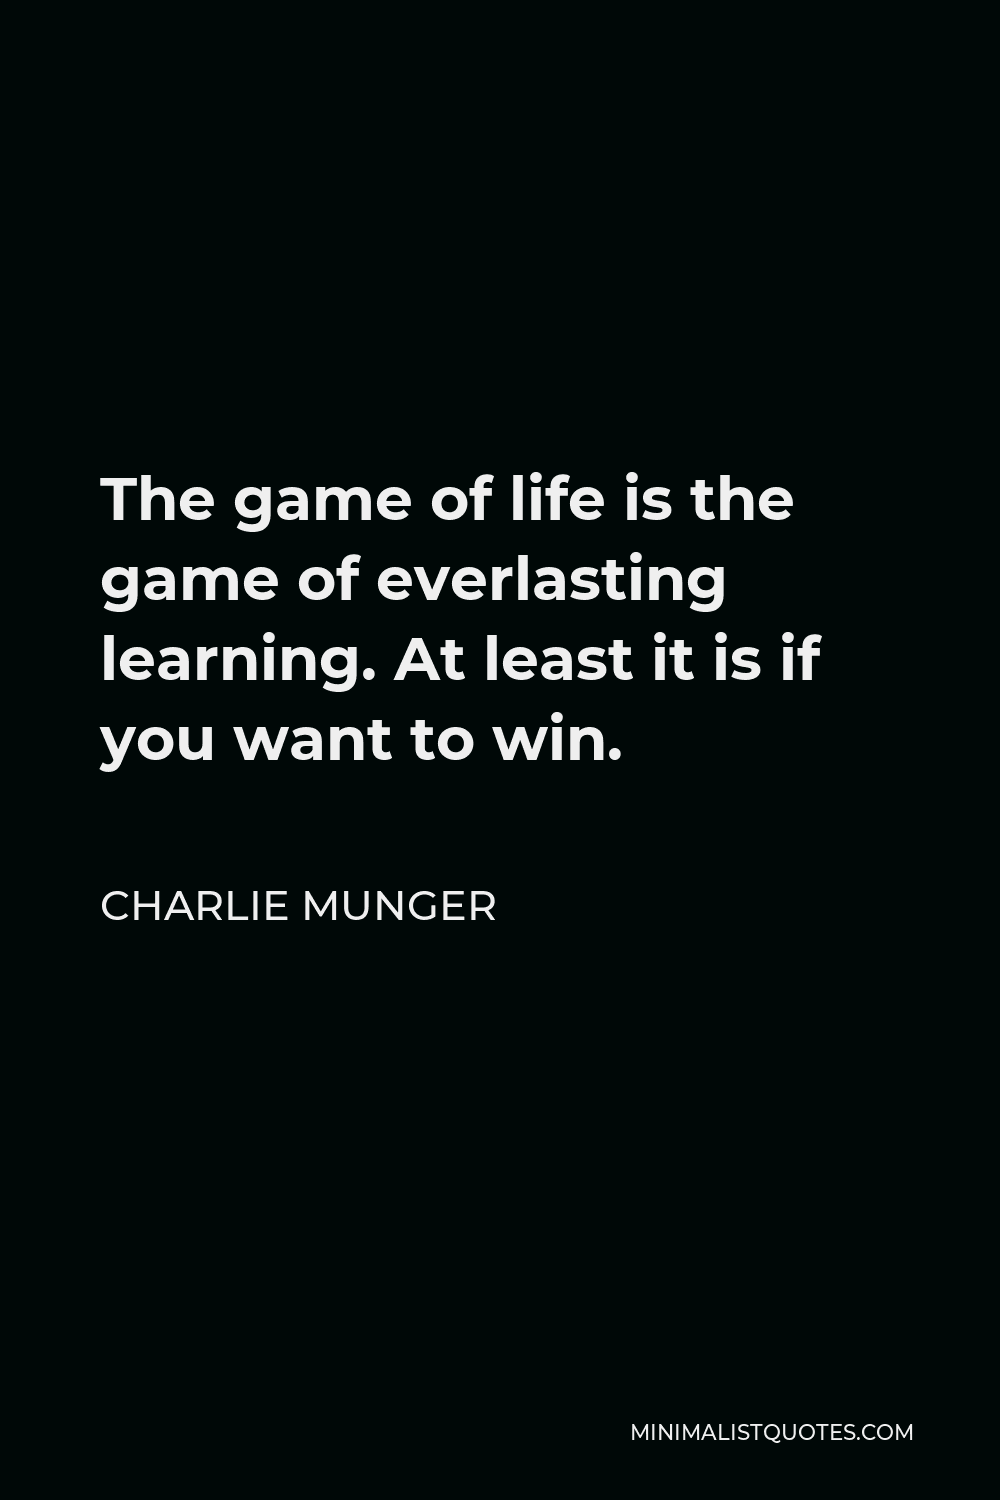 Charlie Munger Quote - The game of life is the game of everlasting learning. At least it is if you want to win.